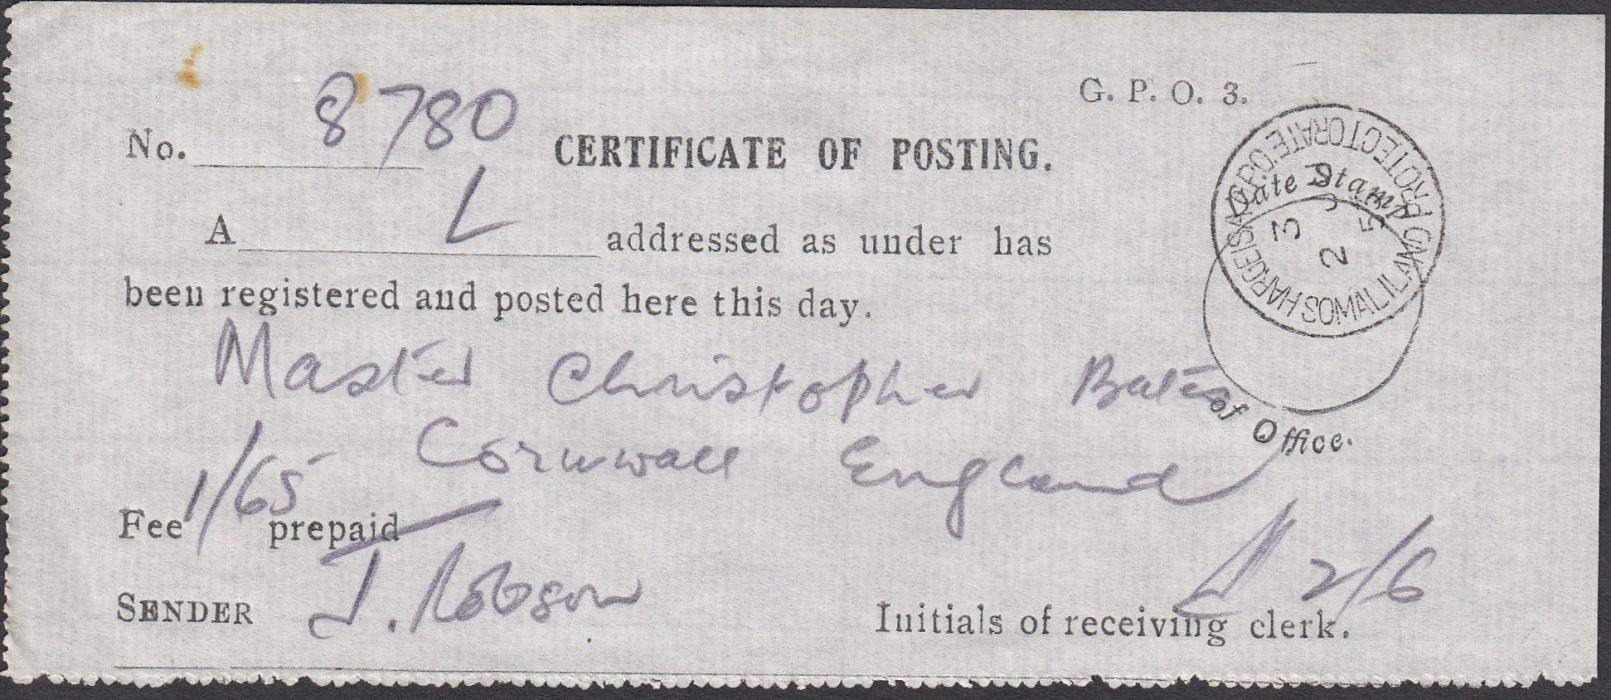 SOMALILAND PROTECTORATE 1953 Certificate of Posting form for registered item to Cornwall, England, cancelled HARGEISA G.P.O. cds; good quality.